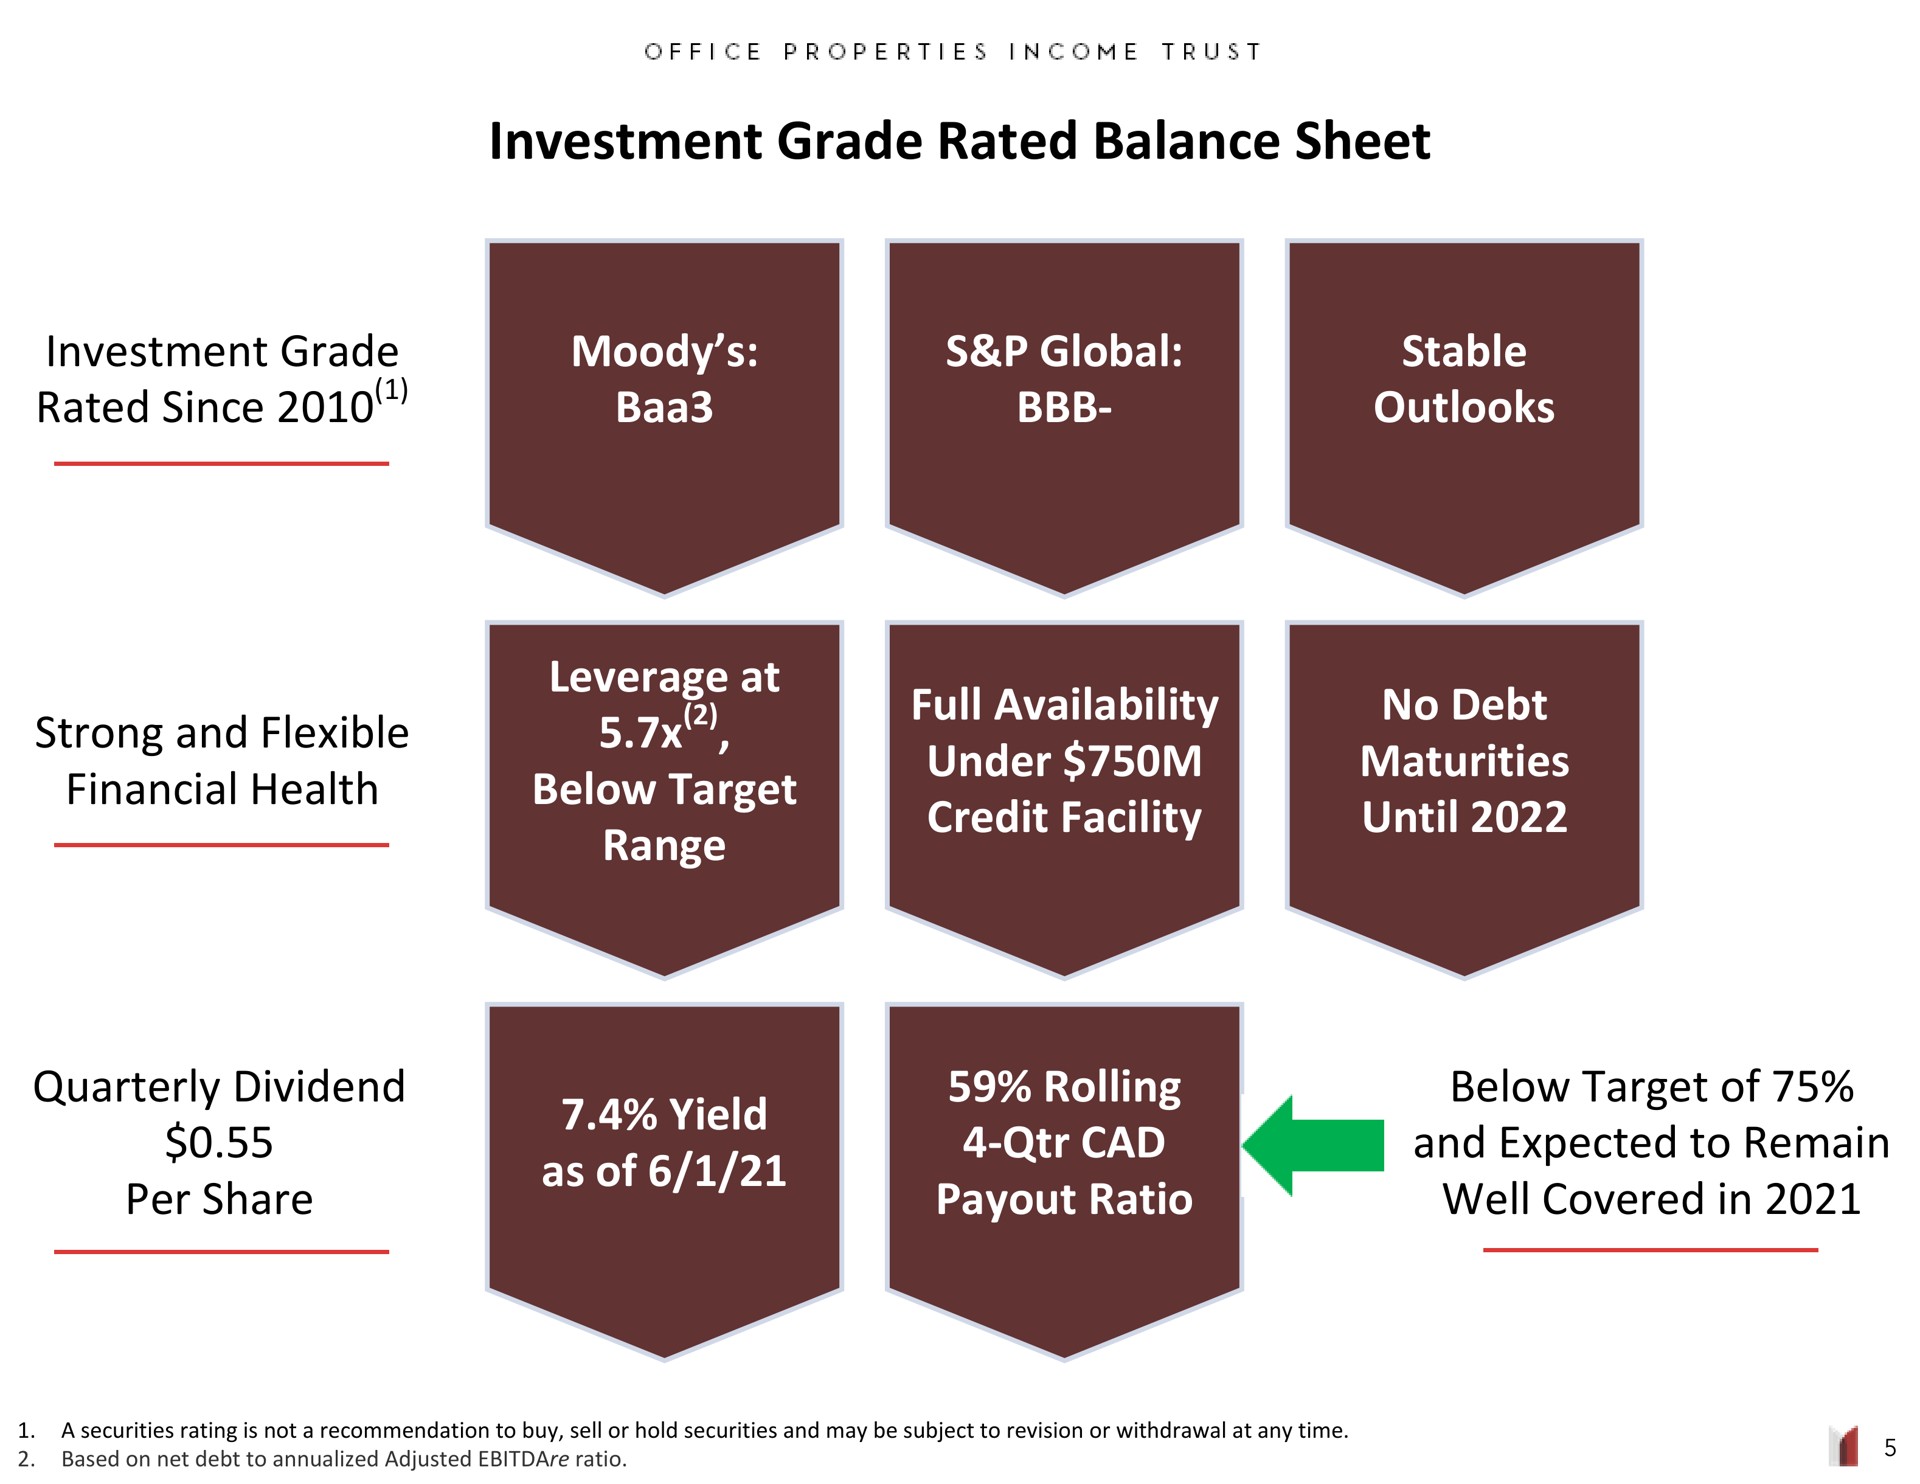 investment grade rated balance sheet investment grade rated since moody baa global stable outlooks strong and flexible financial health leverage at below target range full availability under credit facility no debt maturities until quarterly dividend per share yield as of rolling cad ratio below target of and expected to remain well covered in tar agate mae | Office Properties Income Trust